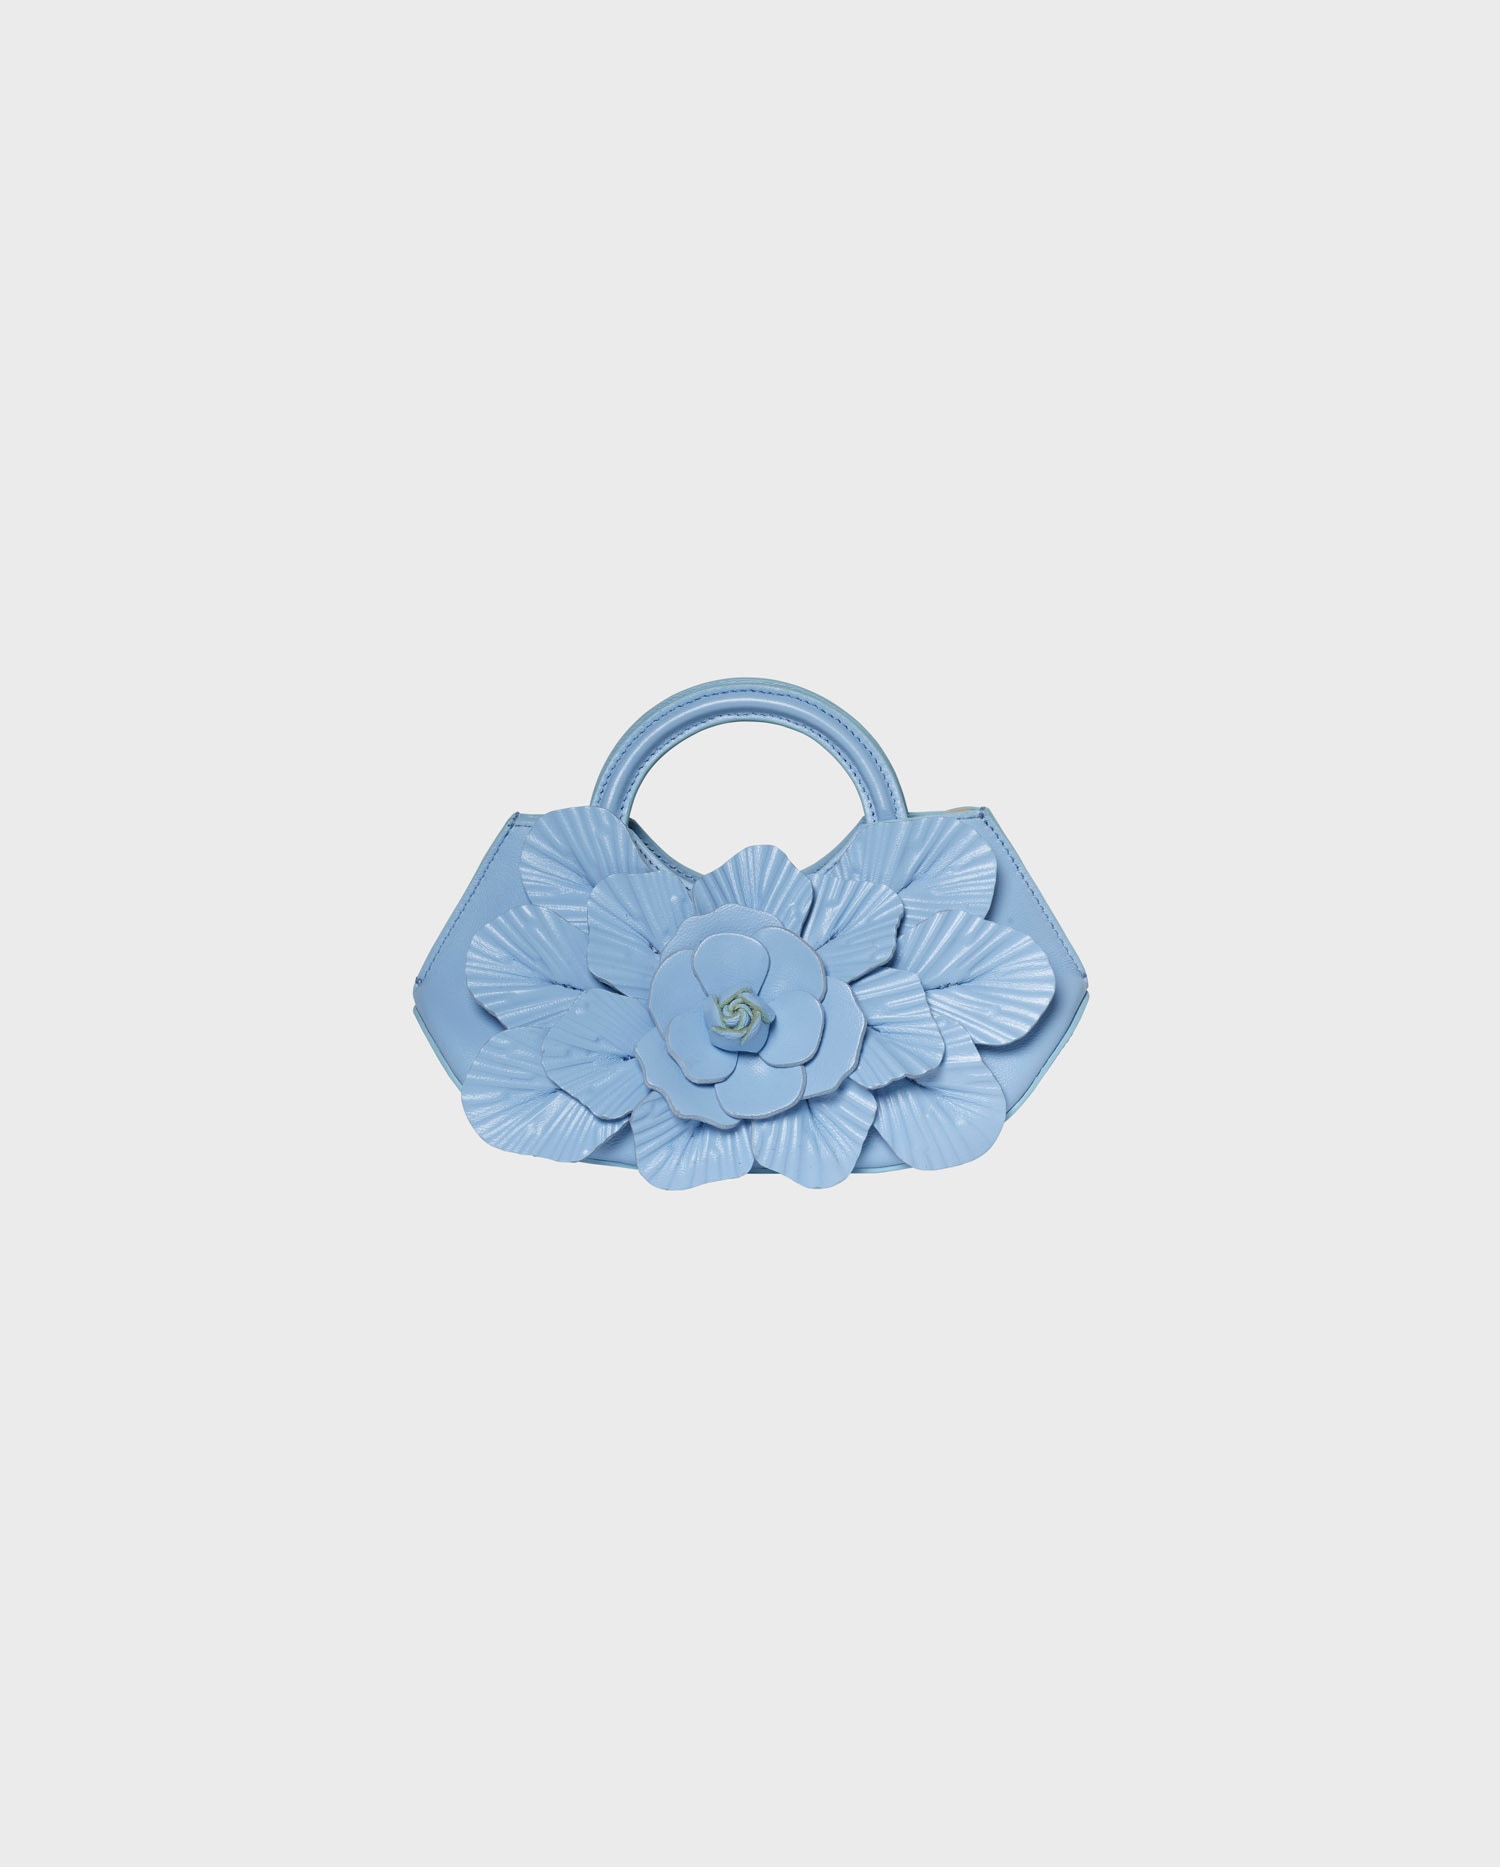 Discover The SCARLETT Signature leather mini floral handbag in riviera blue from ANNE FONTAINE